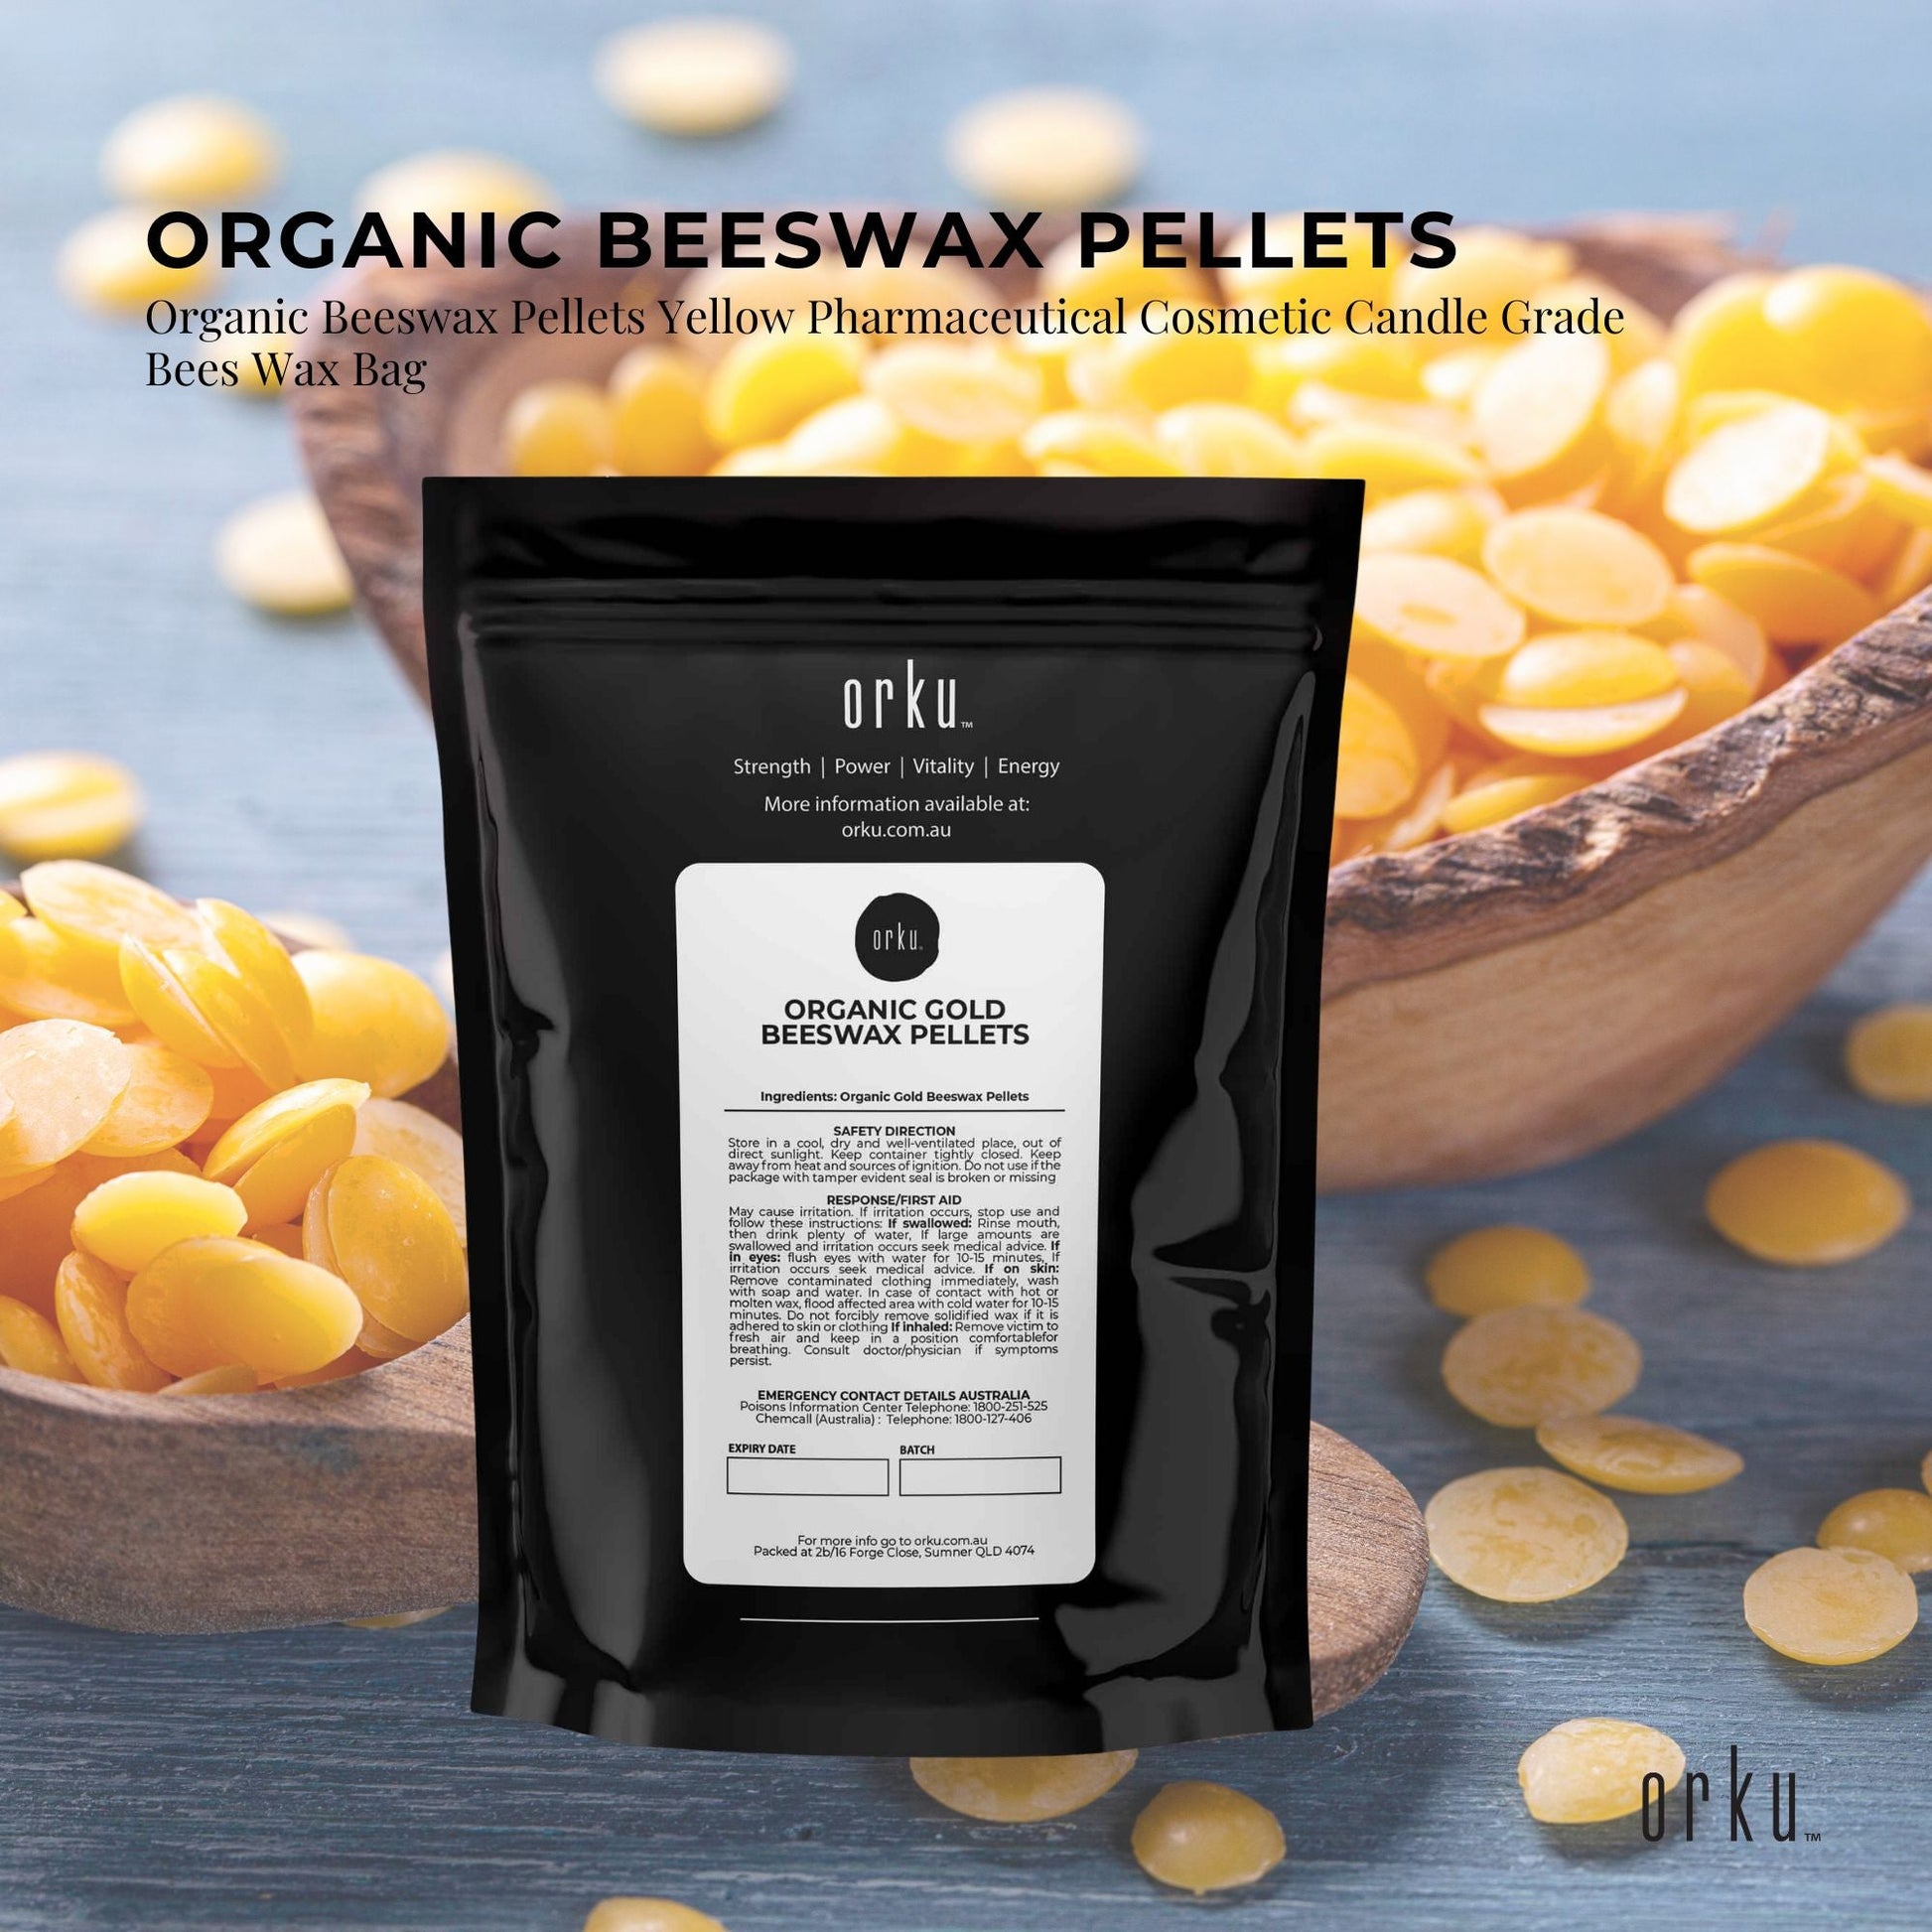 400g Organic Beeswax Pellets Yellow Pharmaceutical Cosmetic Candle Bees Wax